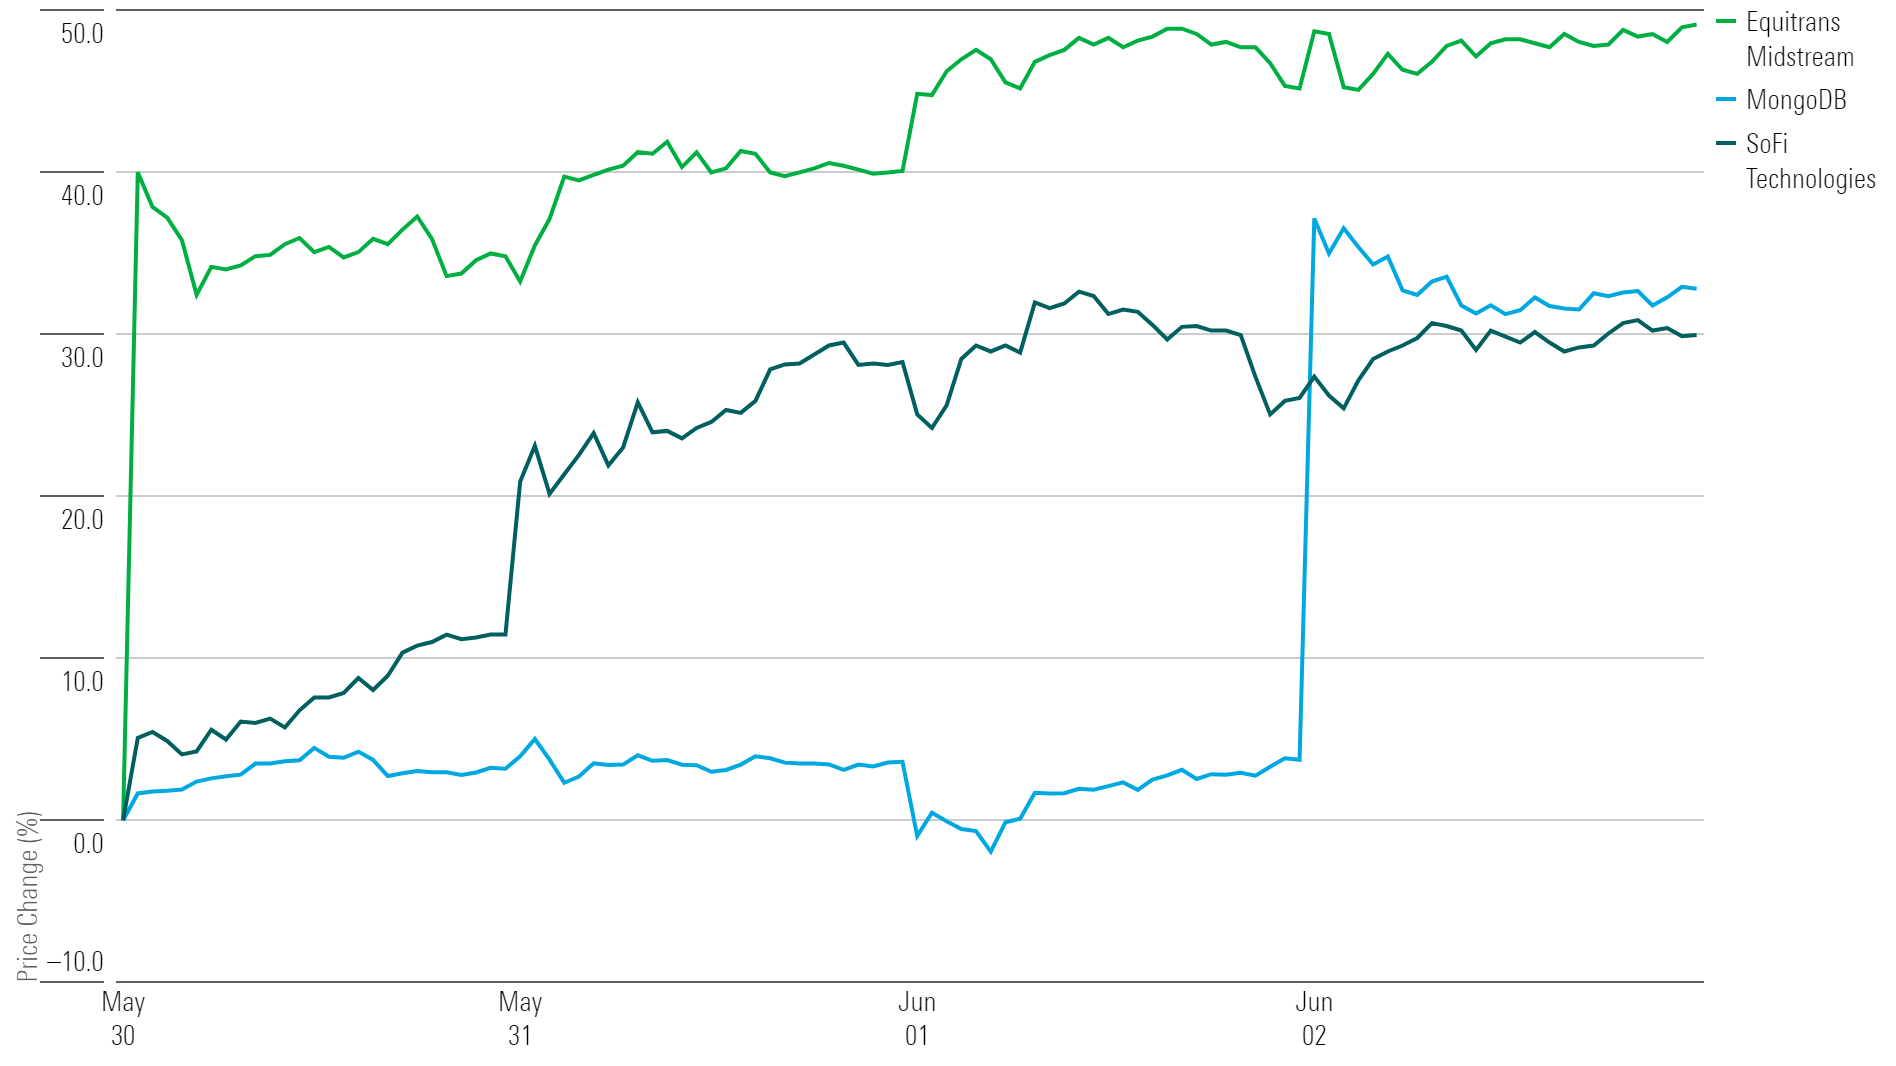 A line chart depicting the performance of Equitrans Midstream, MongoDB, and SoFi Technologies' stocks.